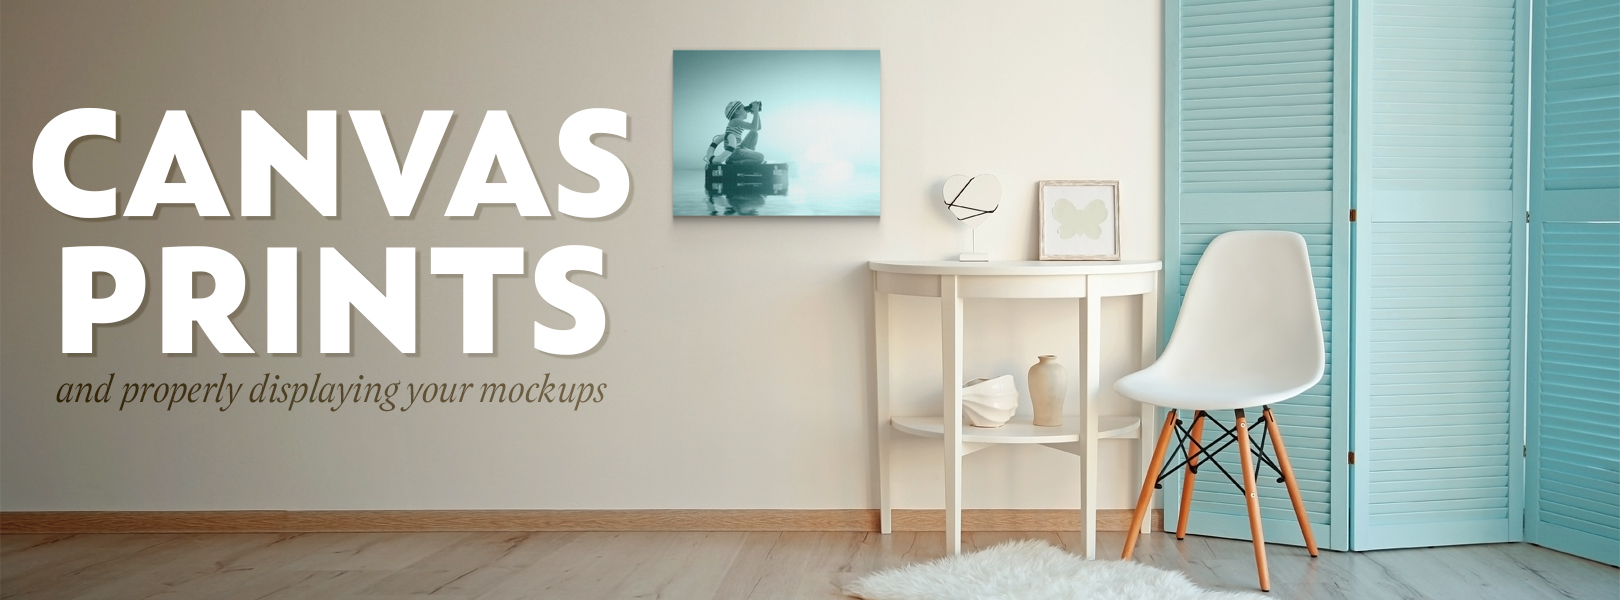 Canvas Prints and Properly Displaying your Mockups